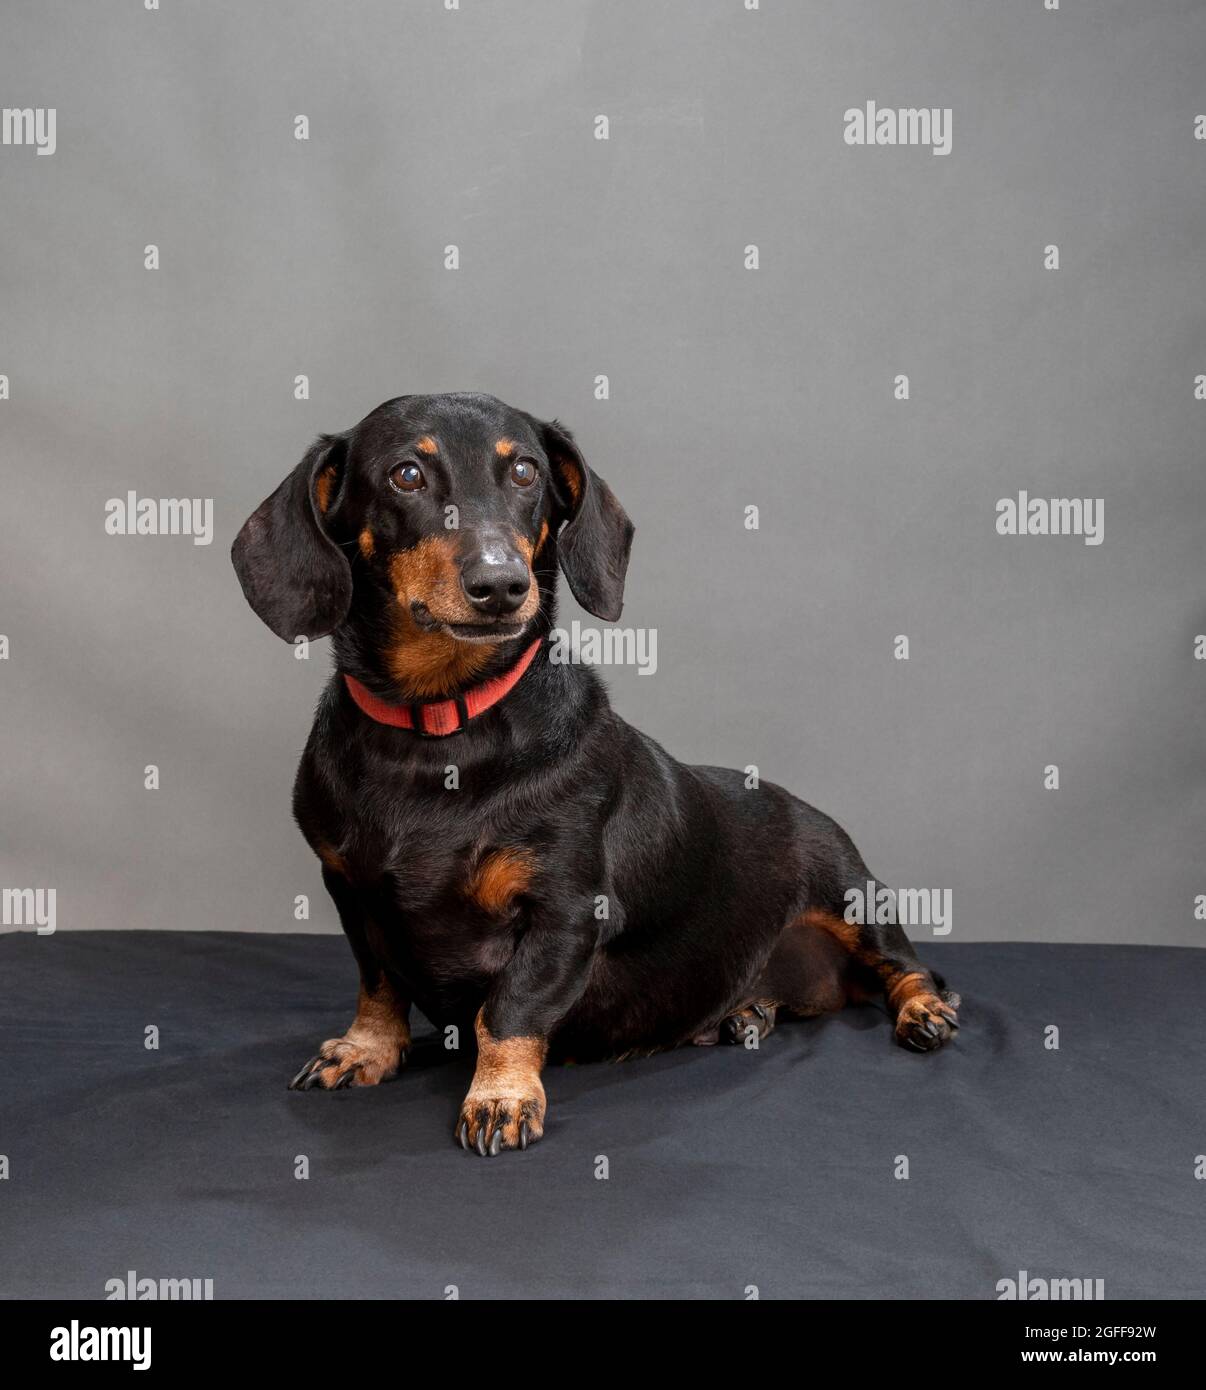 Vertical shot of a sitting black and red dachshund wearing a red collar against a gray background with copyspace. Stock Photo